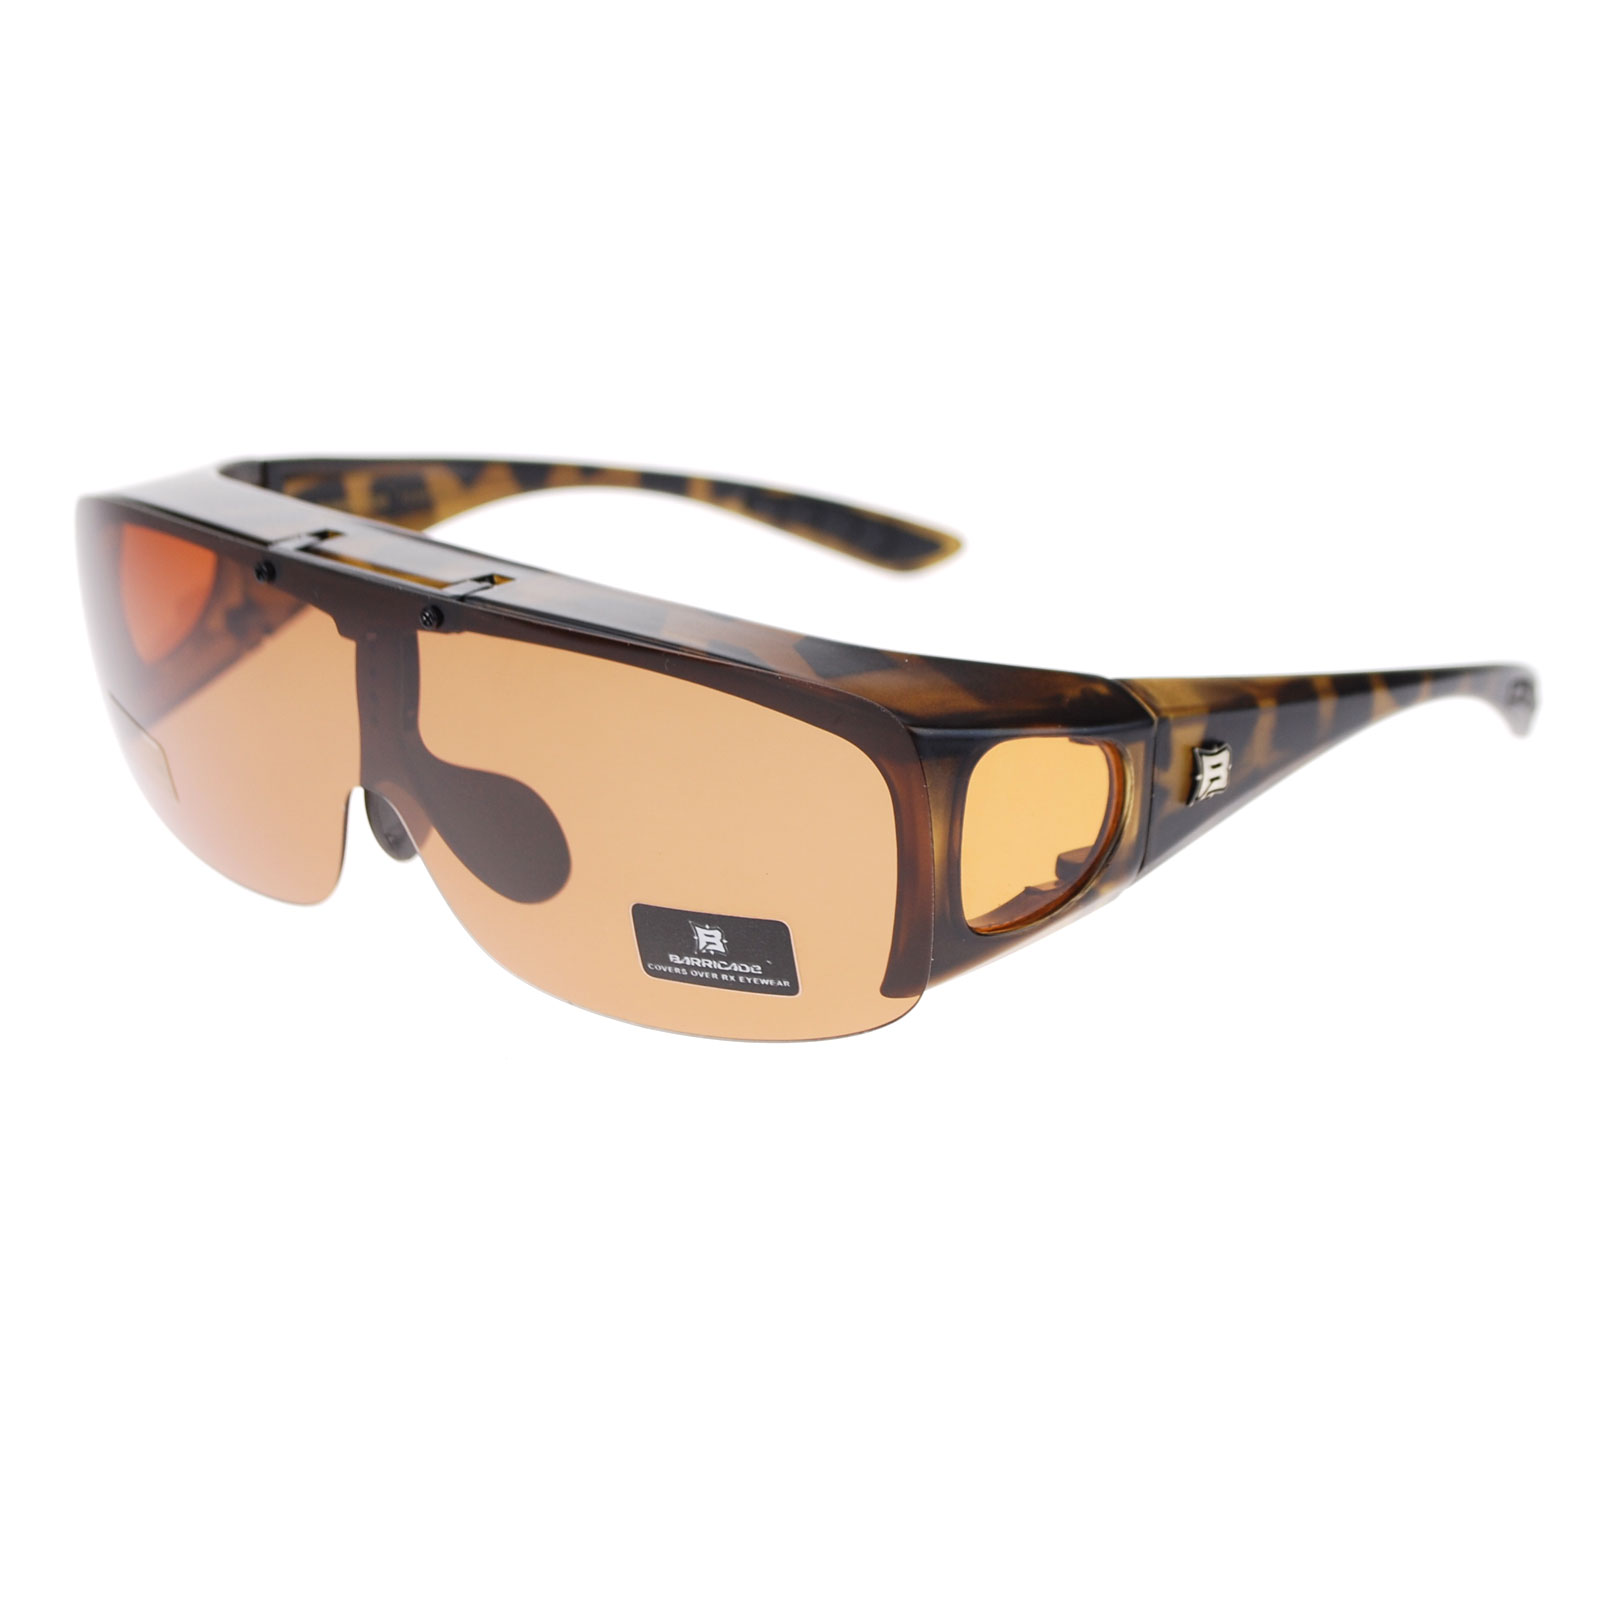 Barricade Large Mens Polarized Flip Up Fitover Sunglasses Tortoise Brown - image 1 of 3